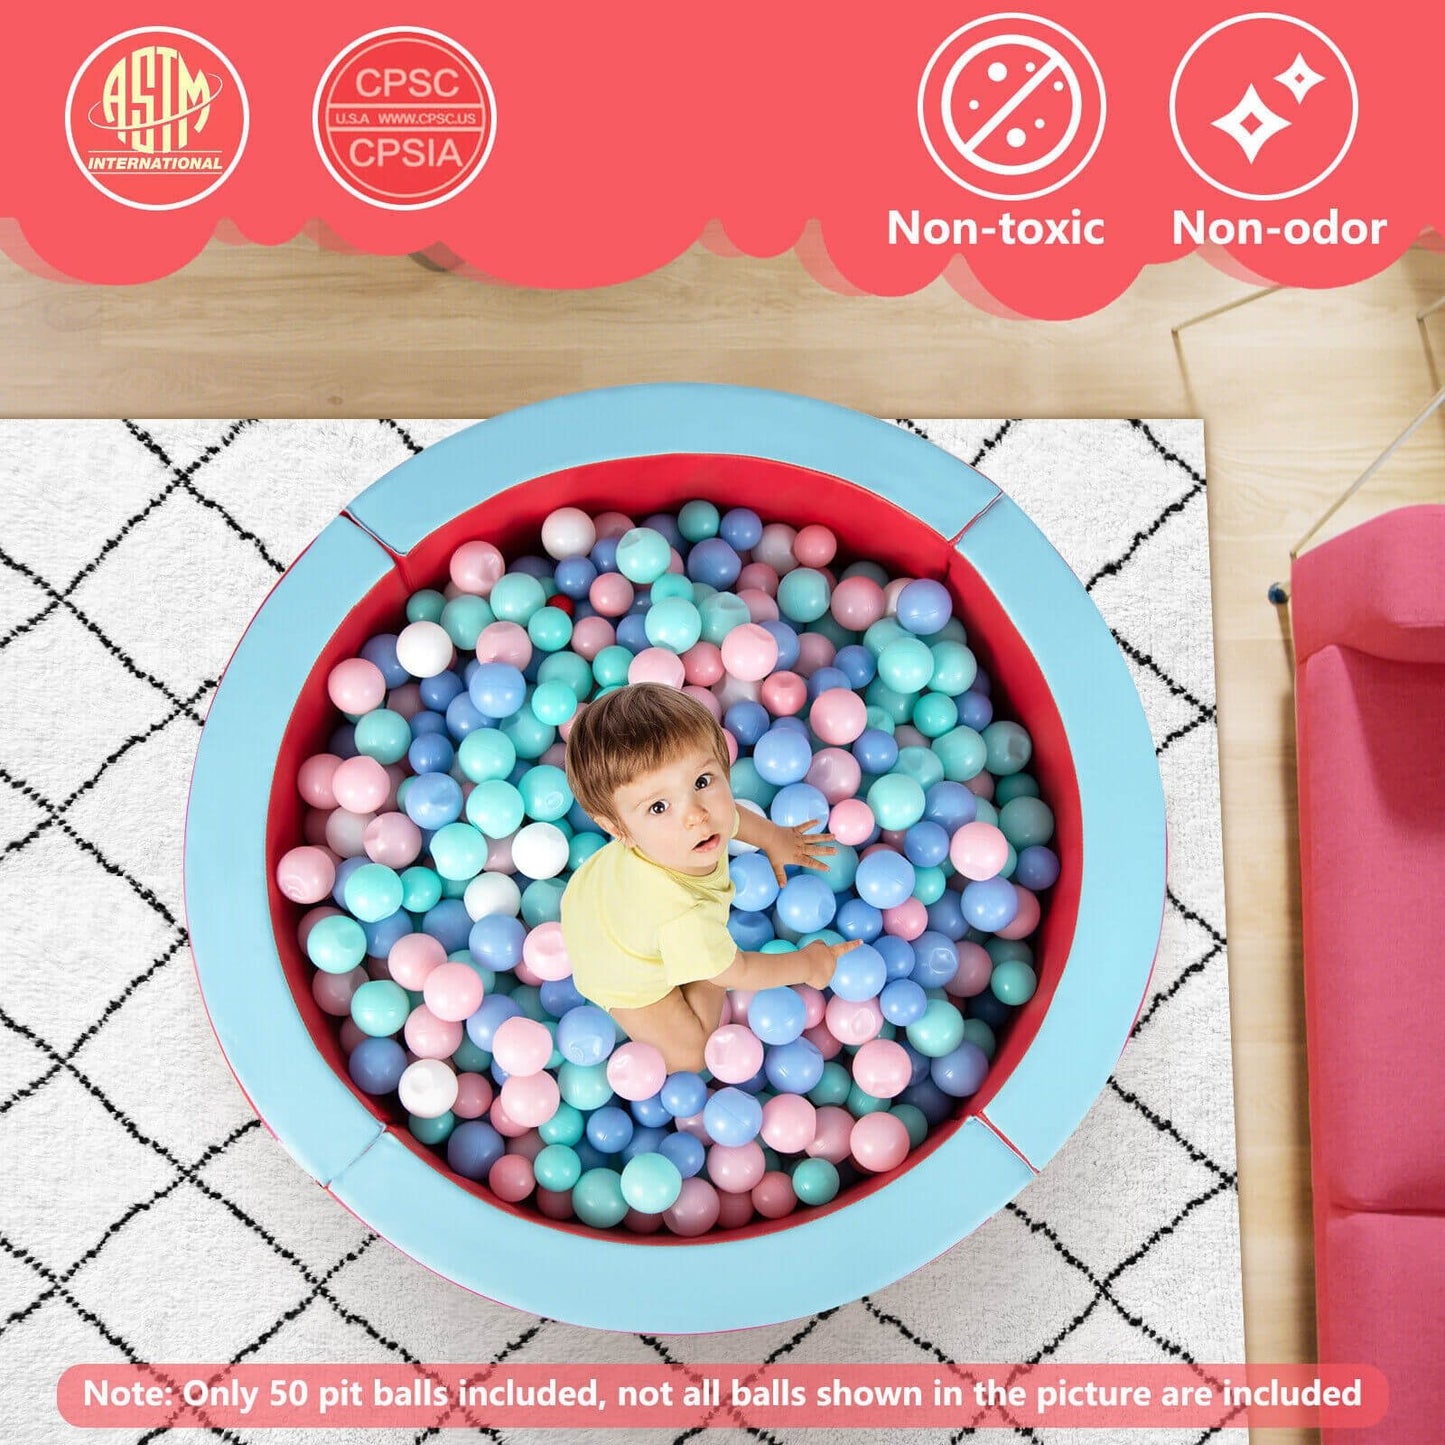 Large Round Foam Ball Pit with PU Surface and 50 Balls, Red - Gallery Canada